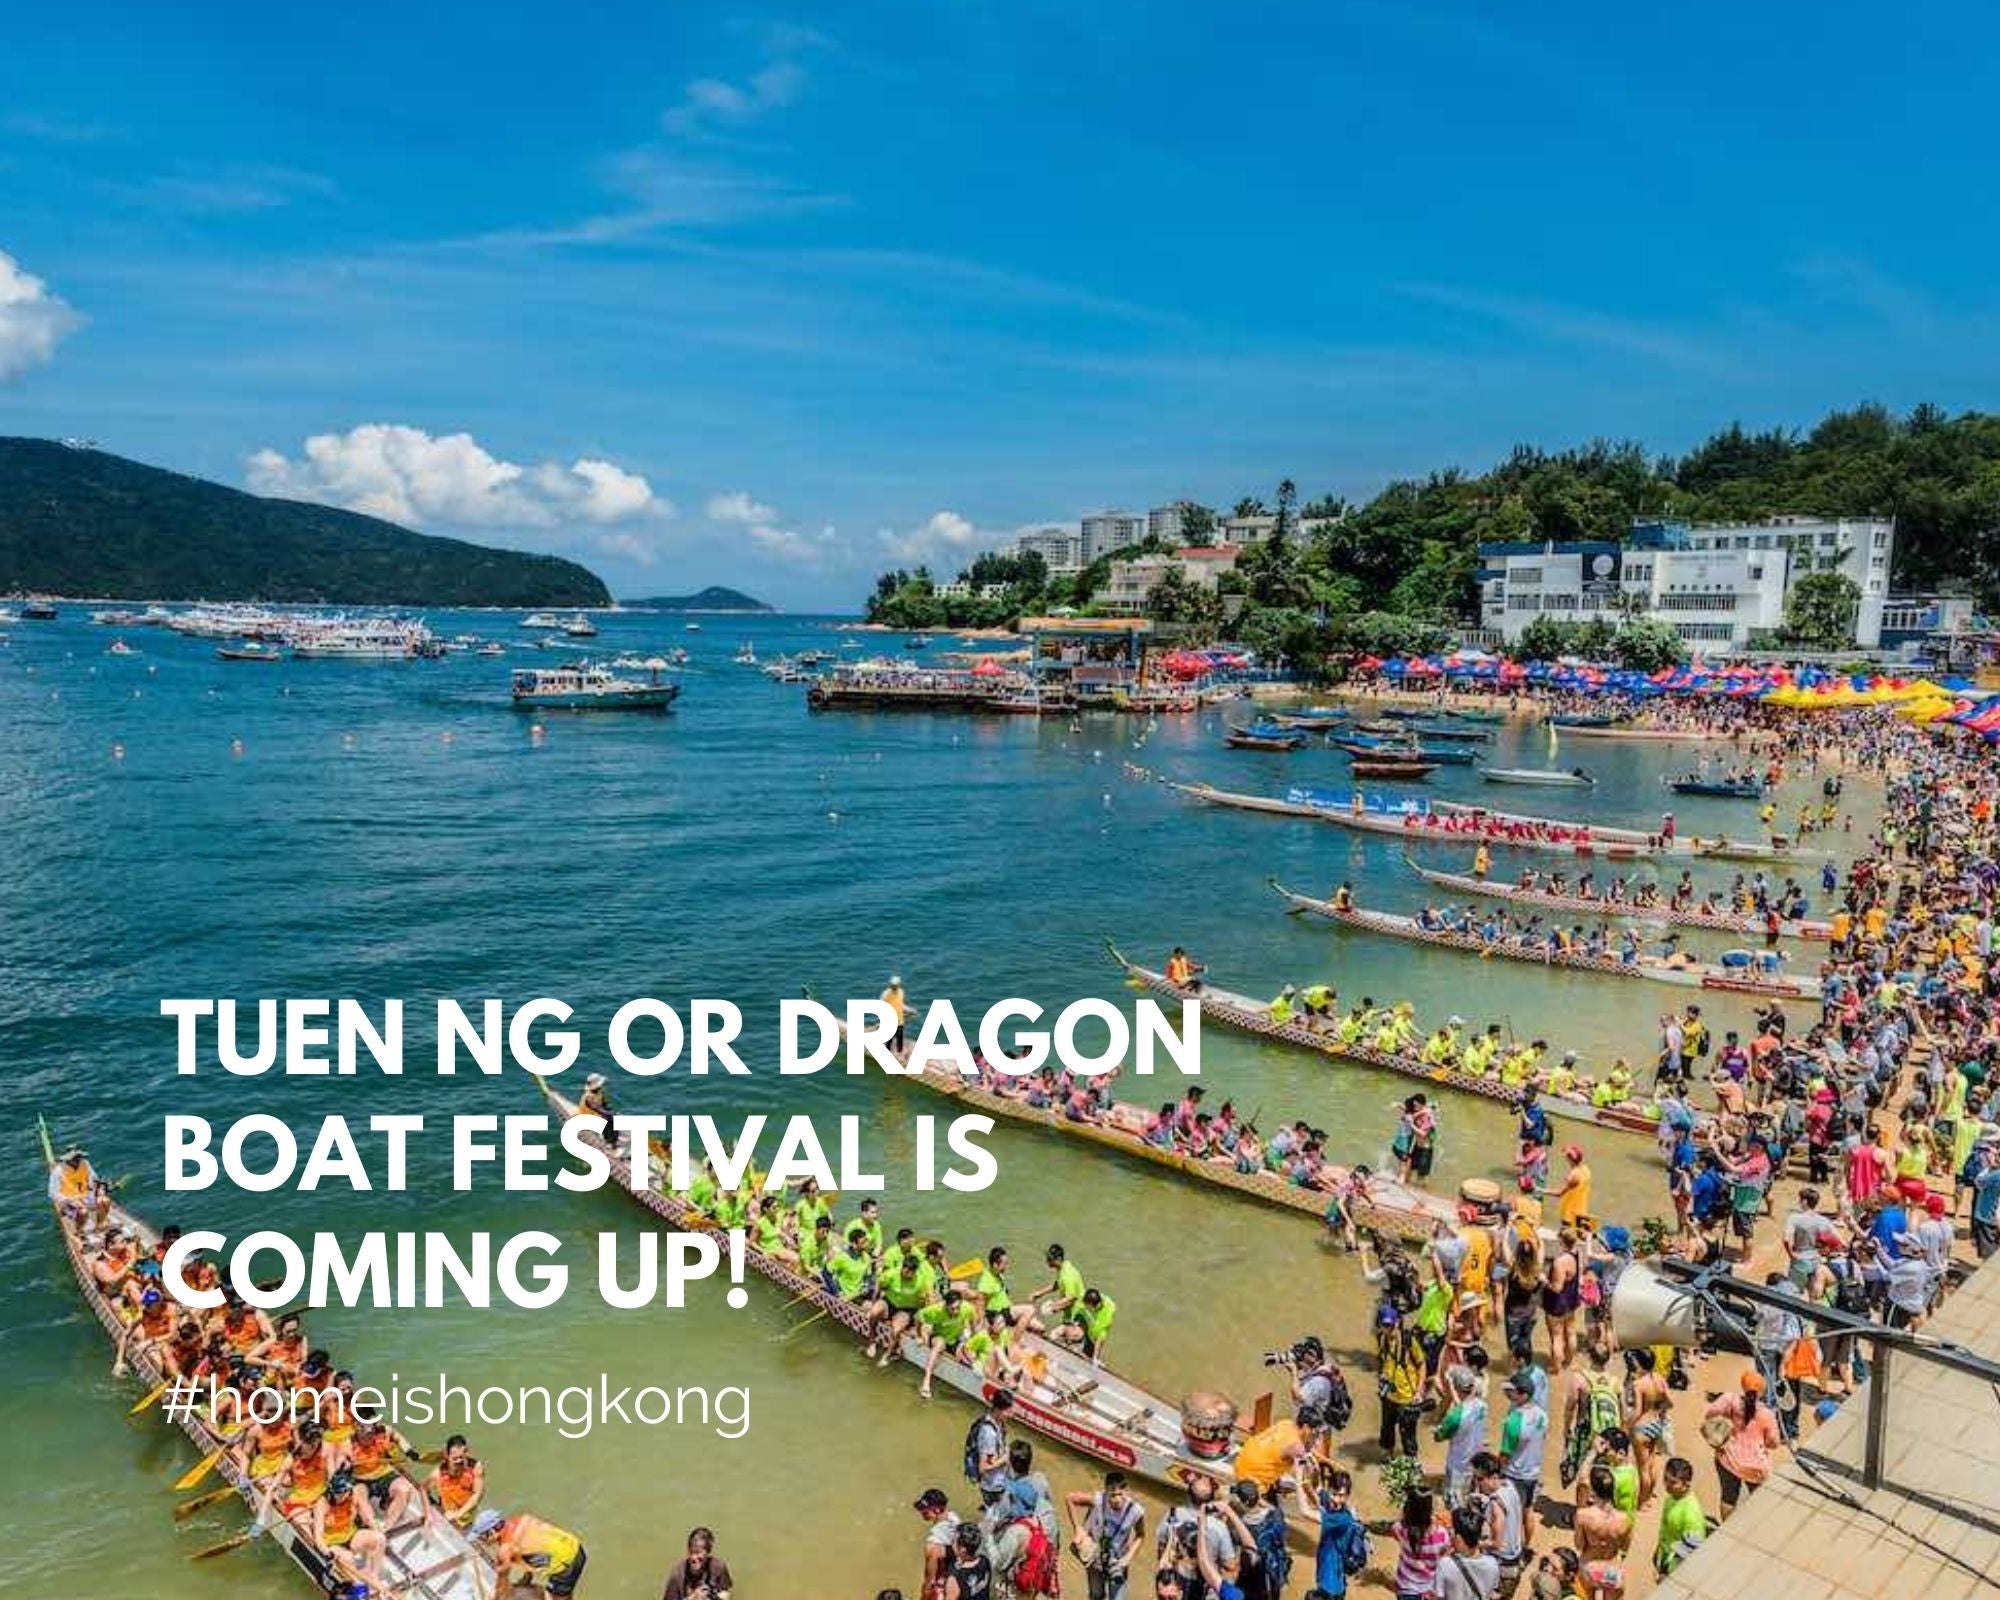 Tuen Ng or Dragon Boat Festival is Coming Up!